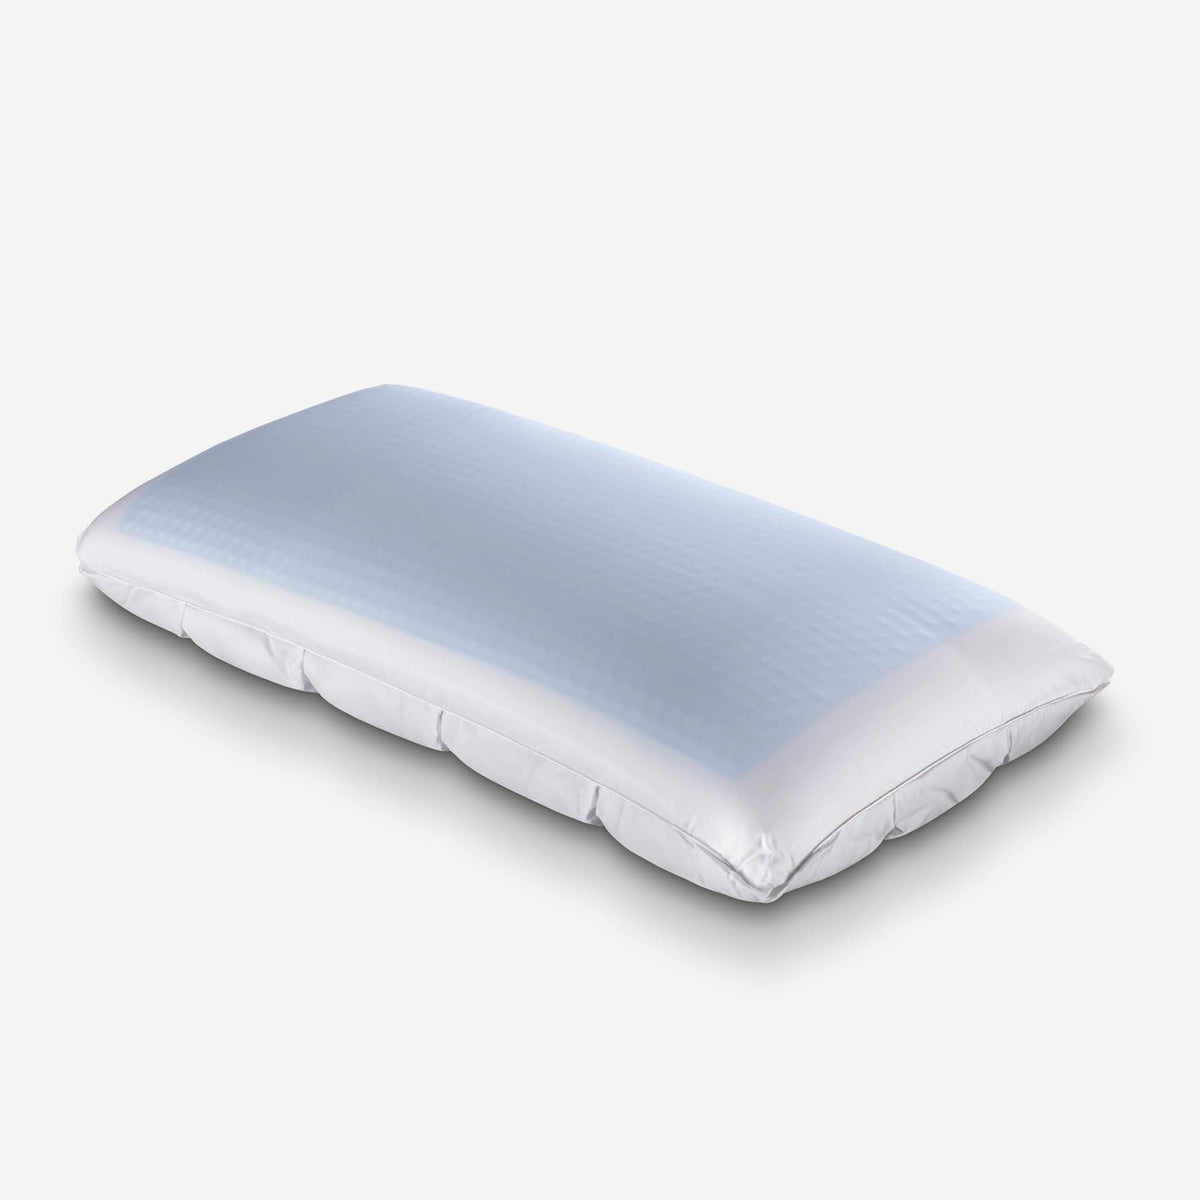 Image of the Cooling SoftCell® Chill Pillow with the cool gel side facing up on a white background